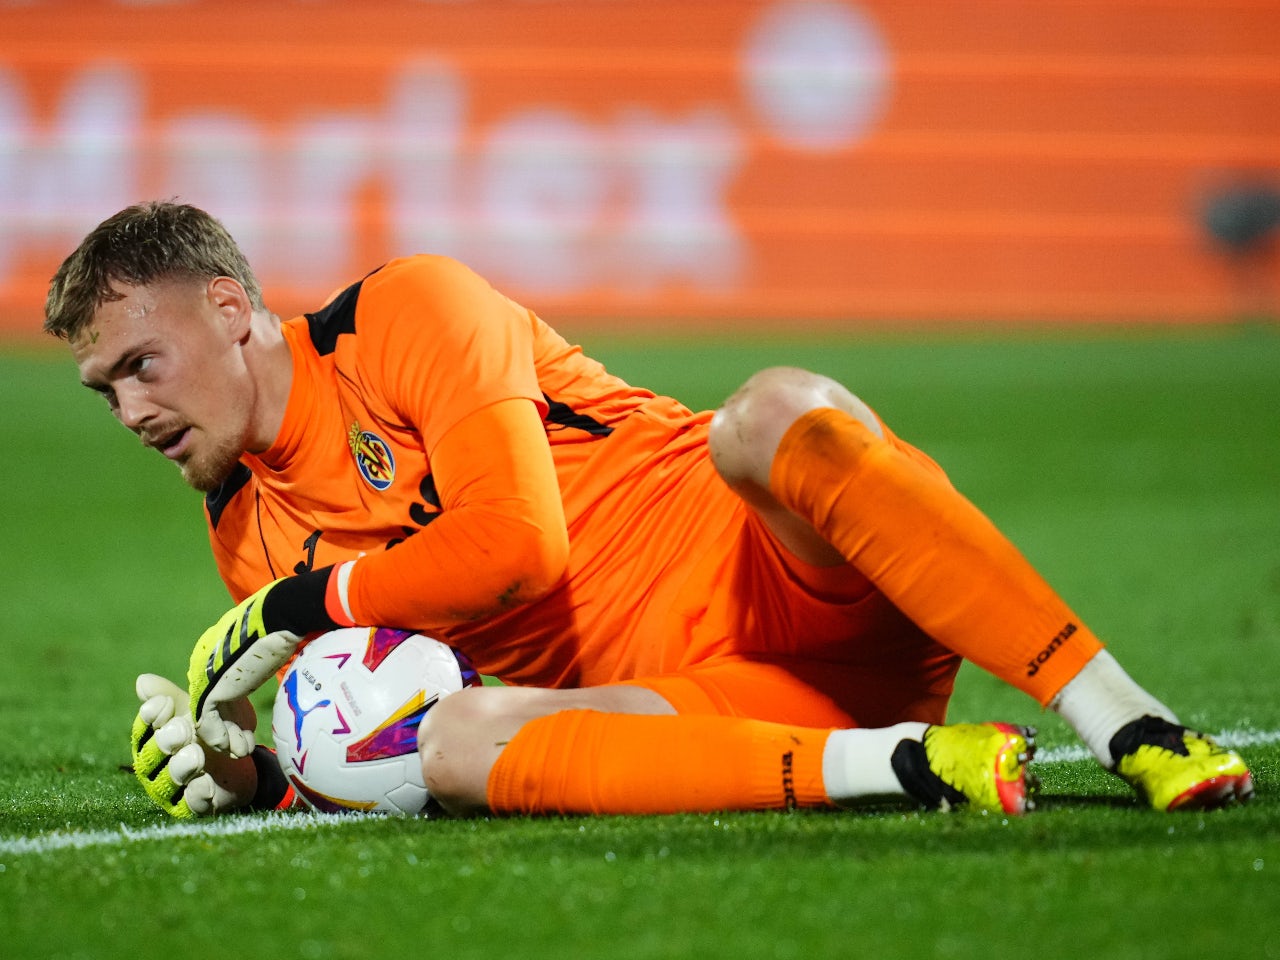 Filip Jorgensen to Chelsea: The lowdown on the Blues' new ball-playing goalkeeper